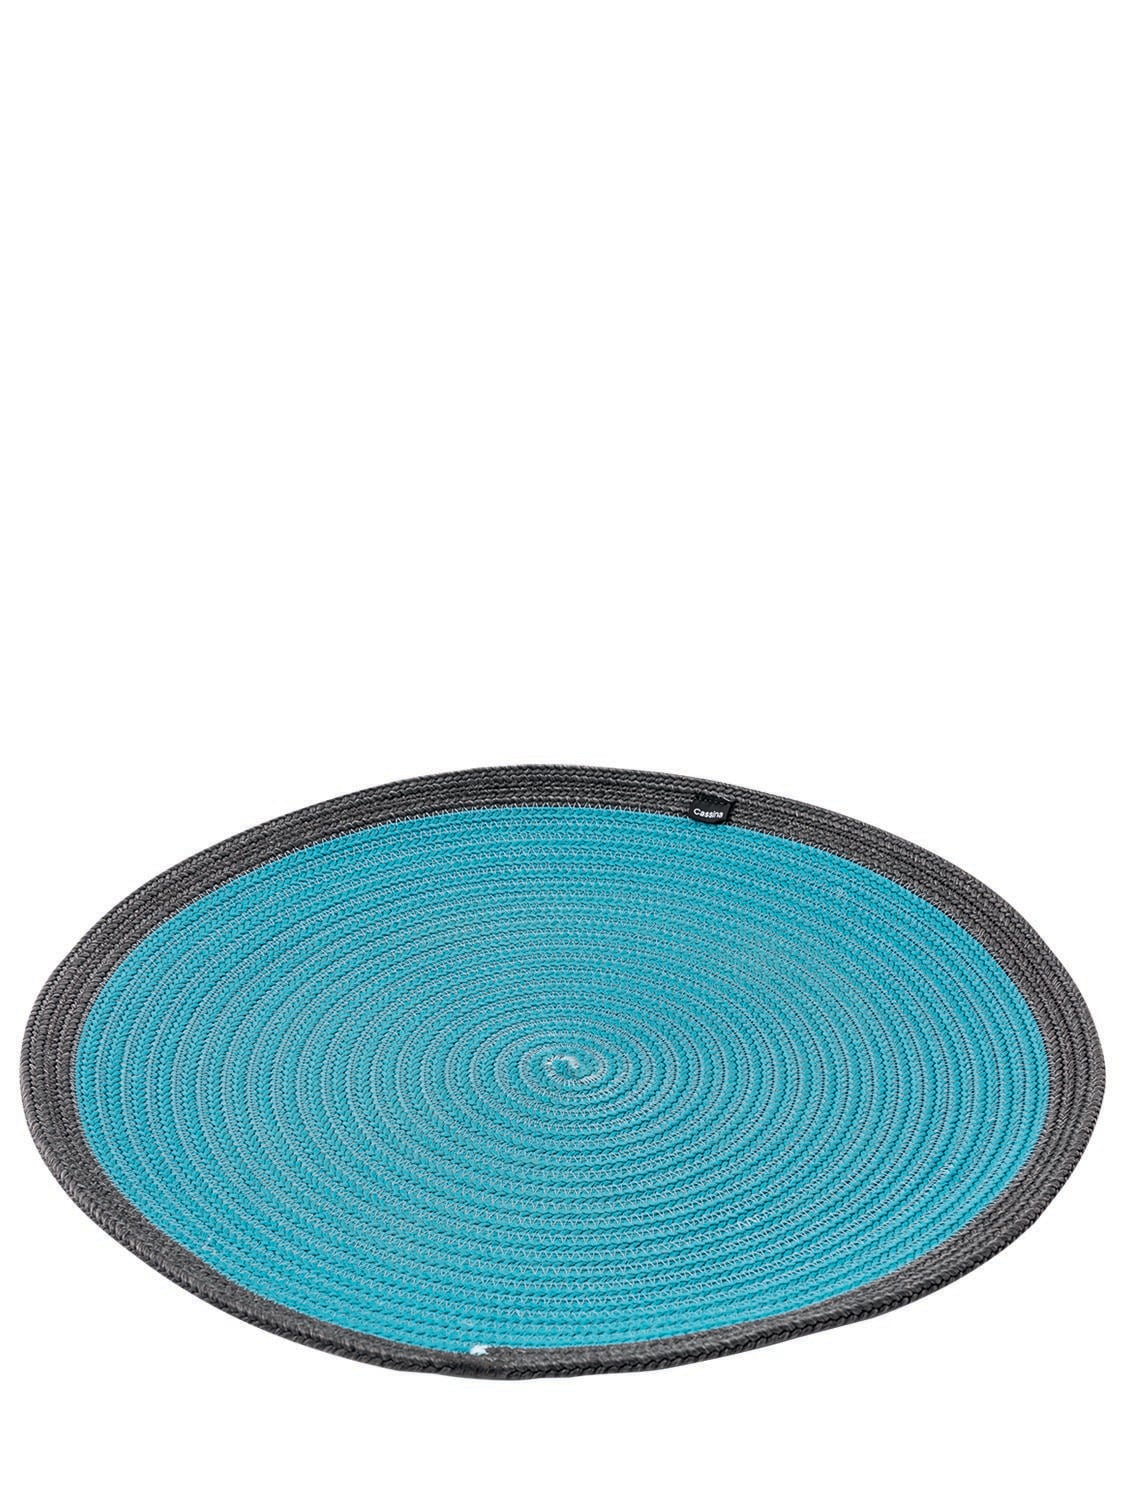 Cassina Mboro Placemat In Blue,grey